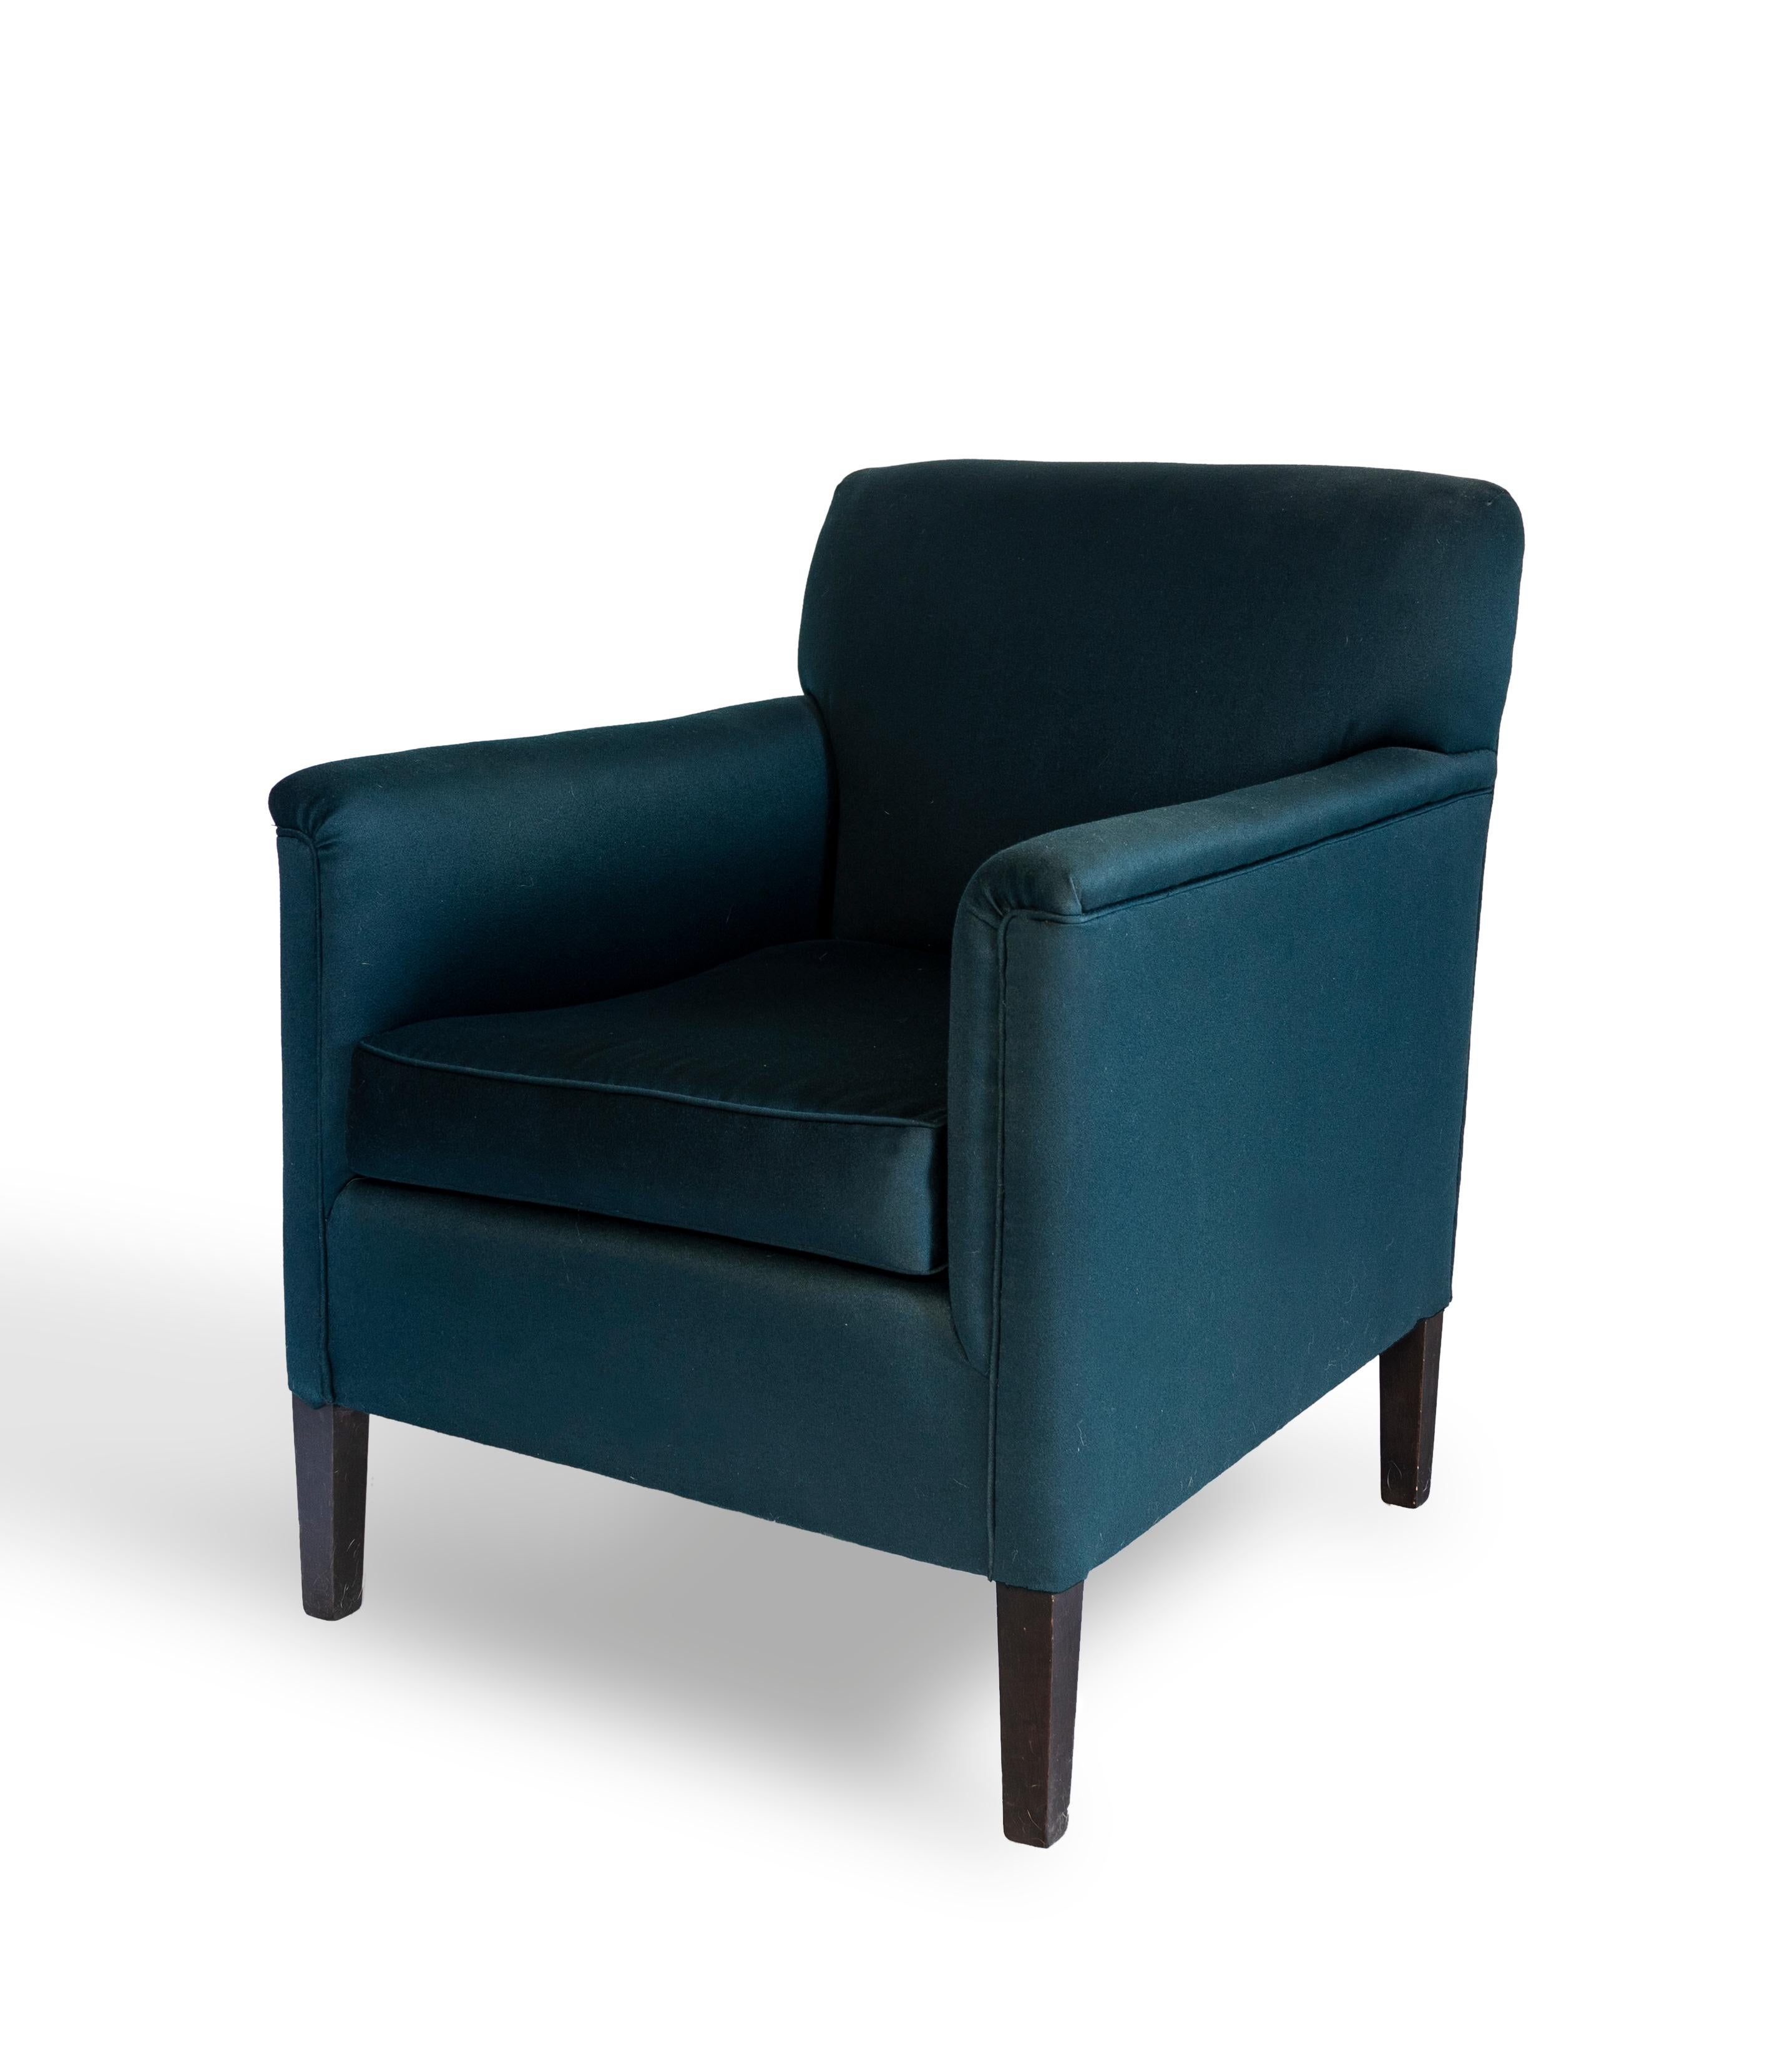 The Herbert chair has a tight upholstered back and loose seat cushion. Tapered front legs and curved back legs are made of blackened hardwood.

Made to order and handcrafted in the USA. Available in wool in a range of colors including dark gray,